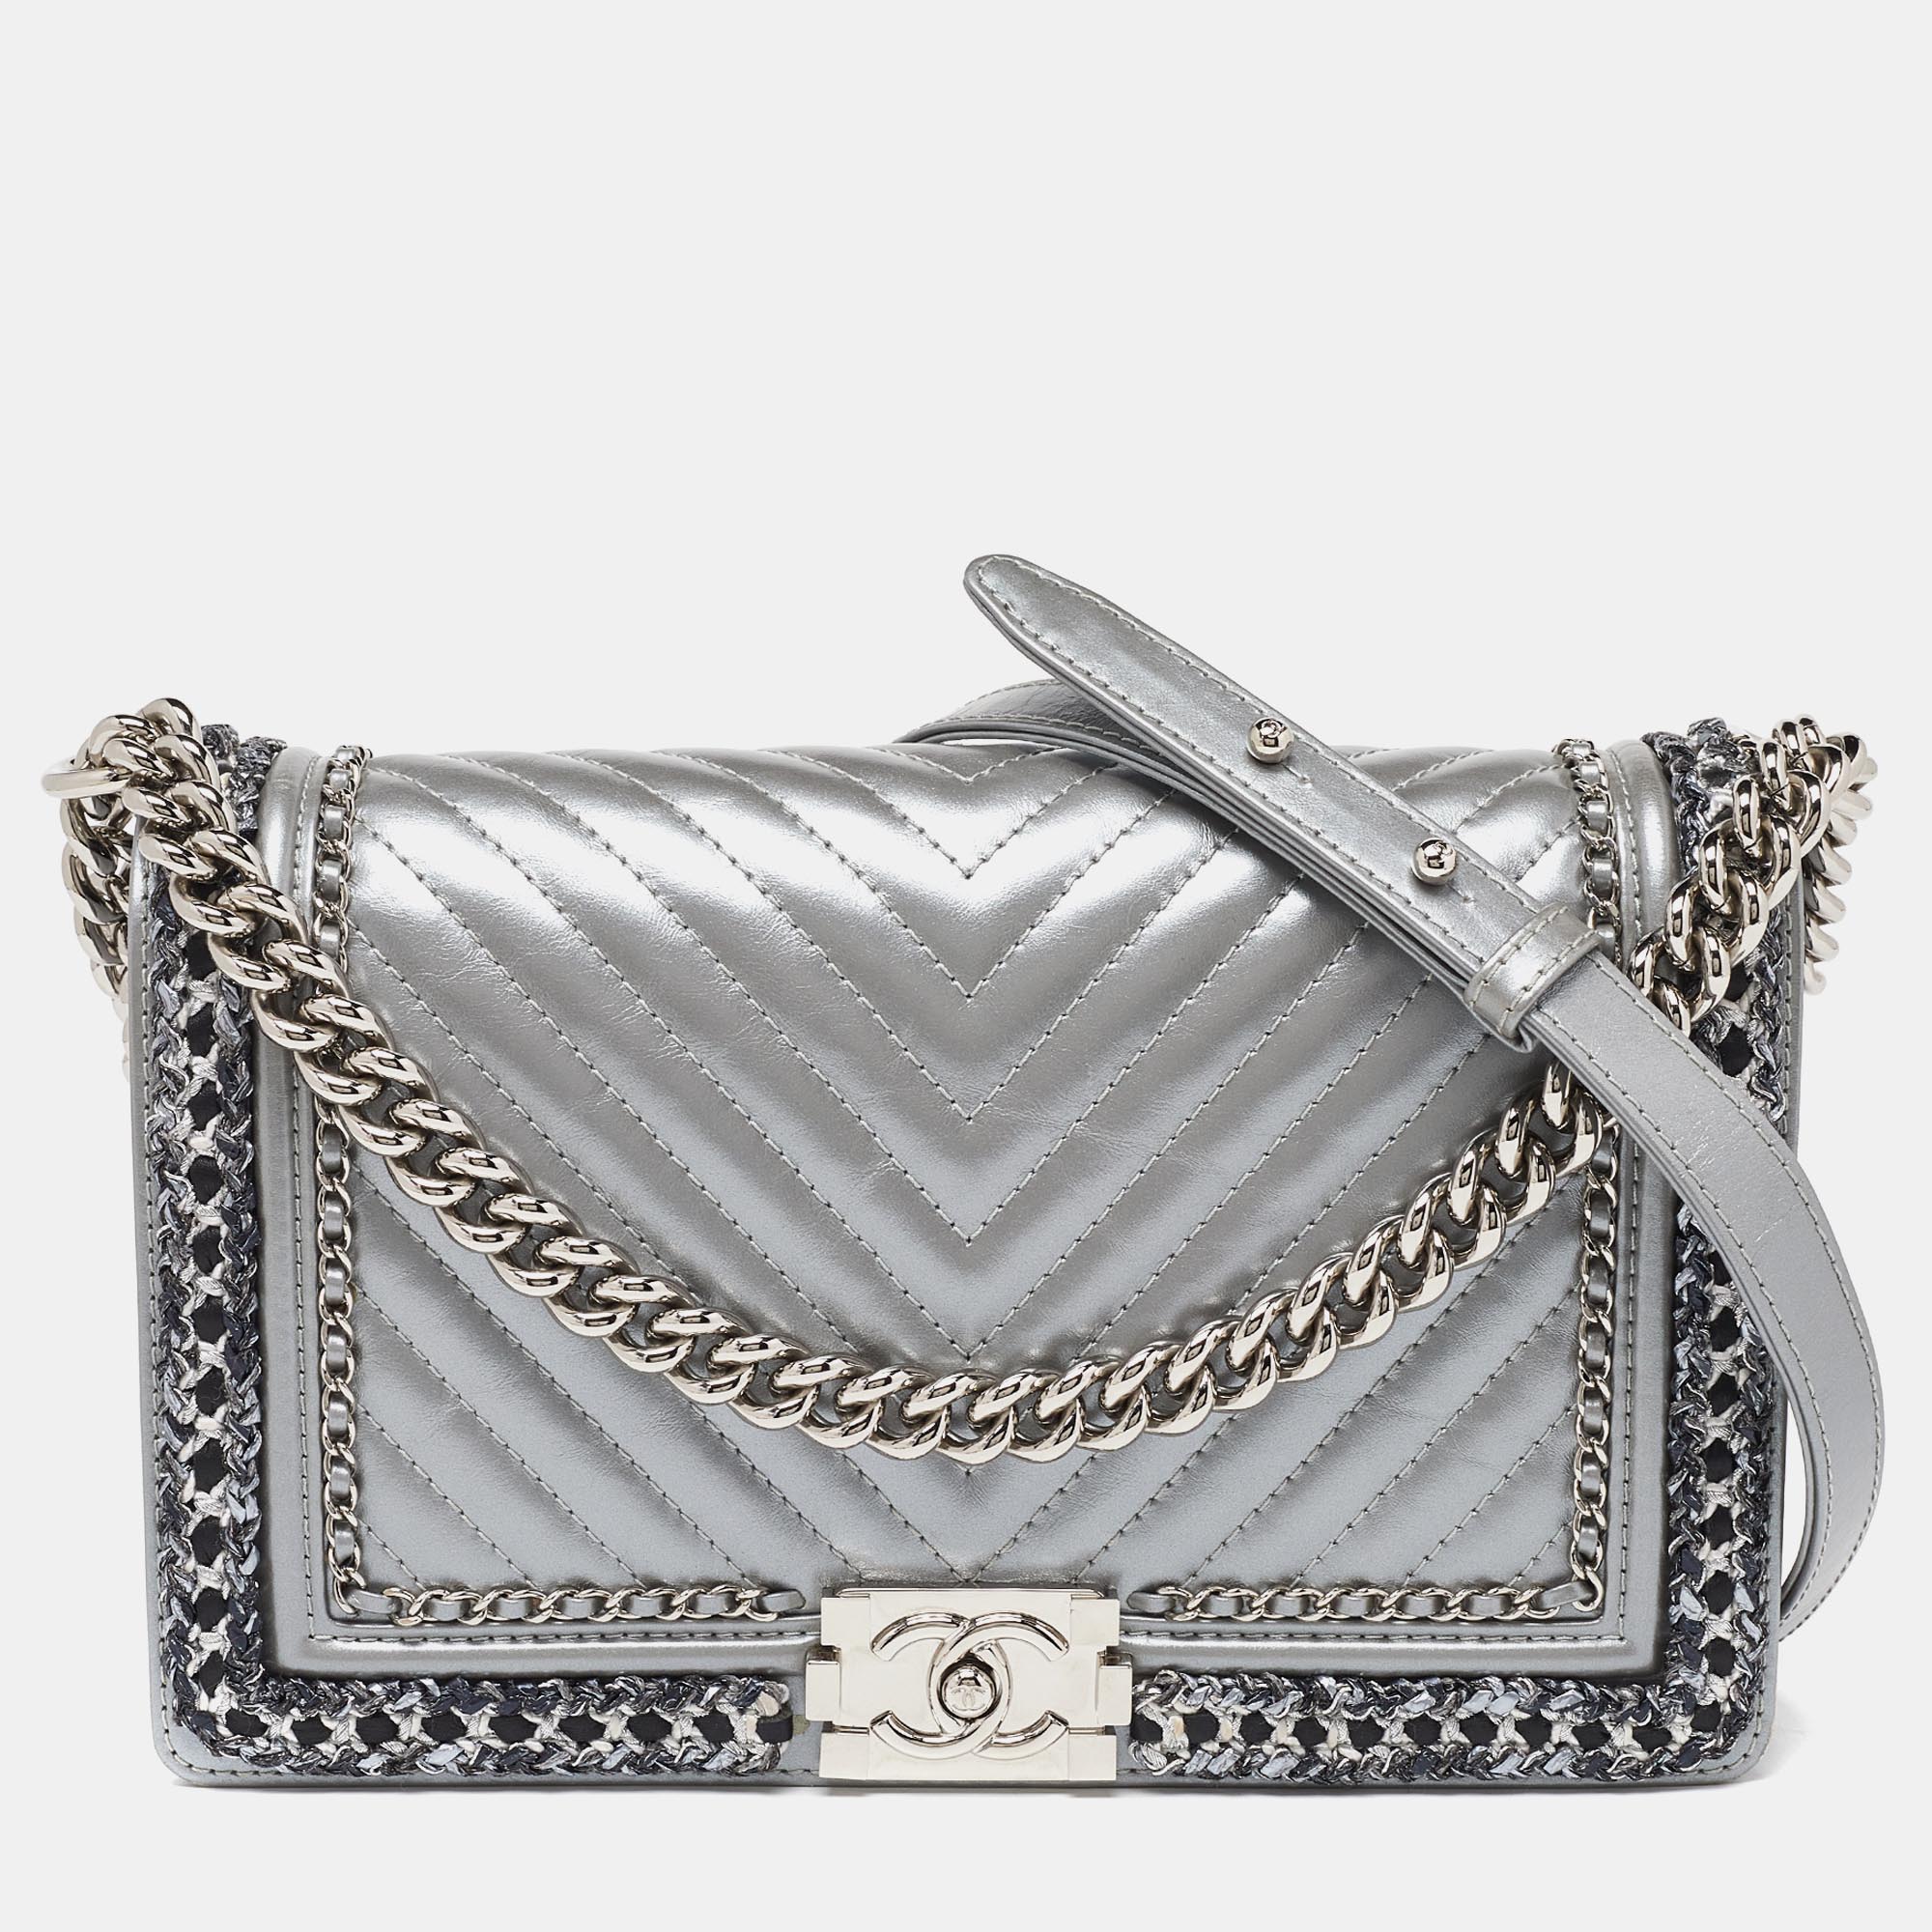 Chanel silver quilted leather new medium boy flap bag